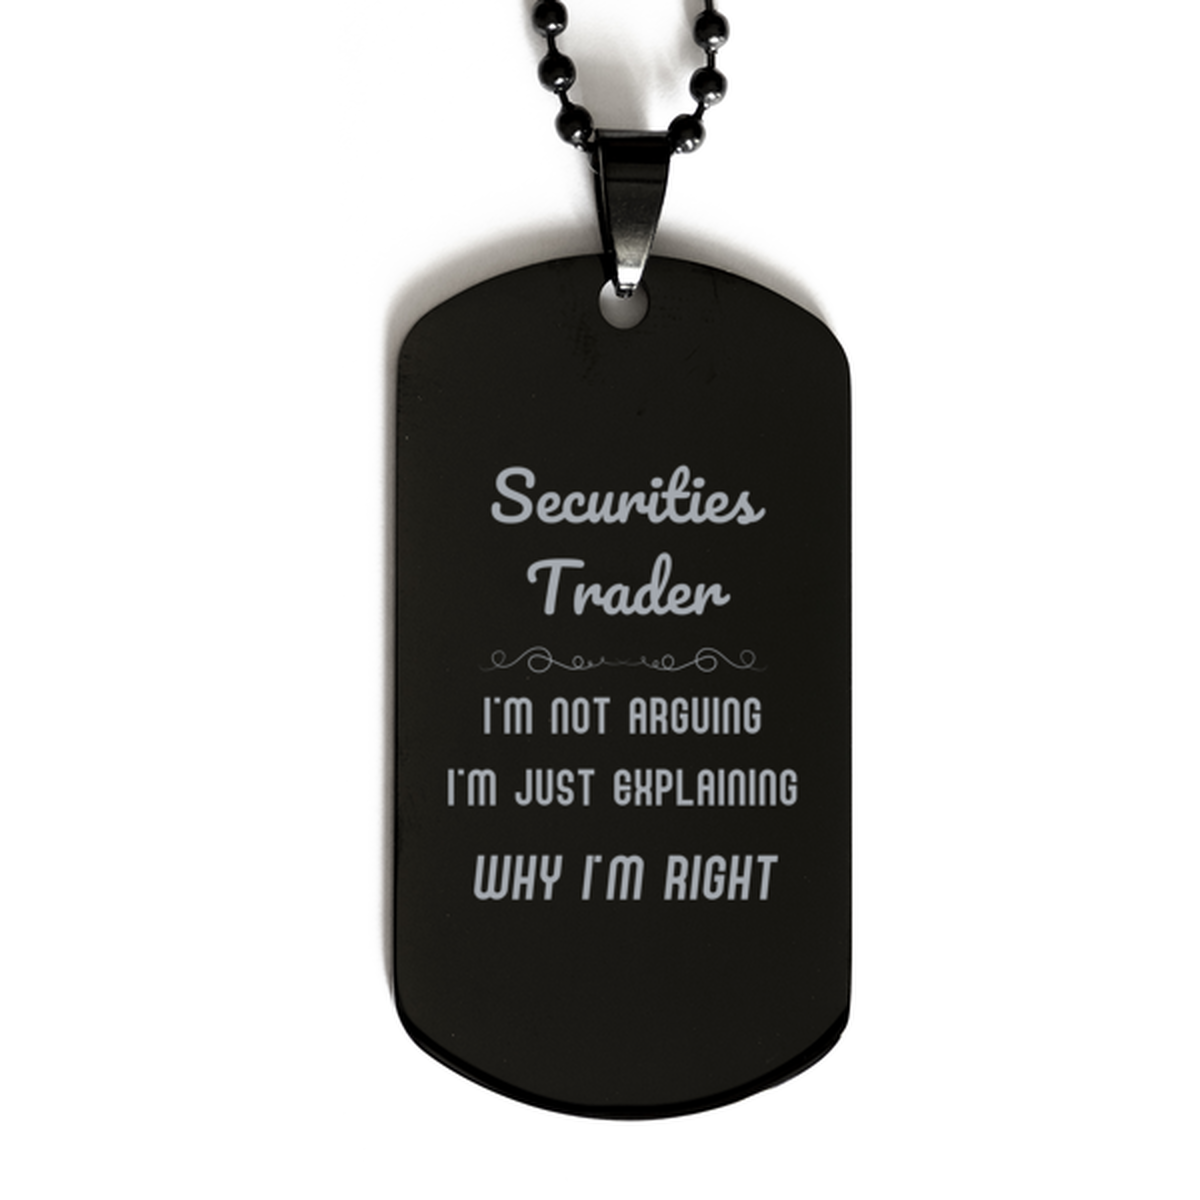 Securities Trader I'm not Arguing. I'm Just Explaining Why I'm RIGHT Black Dog Tag, Funny Saying Quote Securities Trader Gifts For Securities Trader Graduation Birthday Christmas Gifts for Men Women Coworker